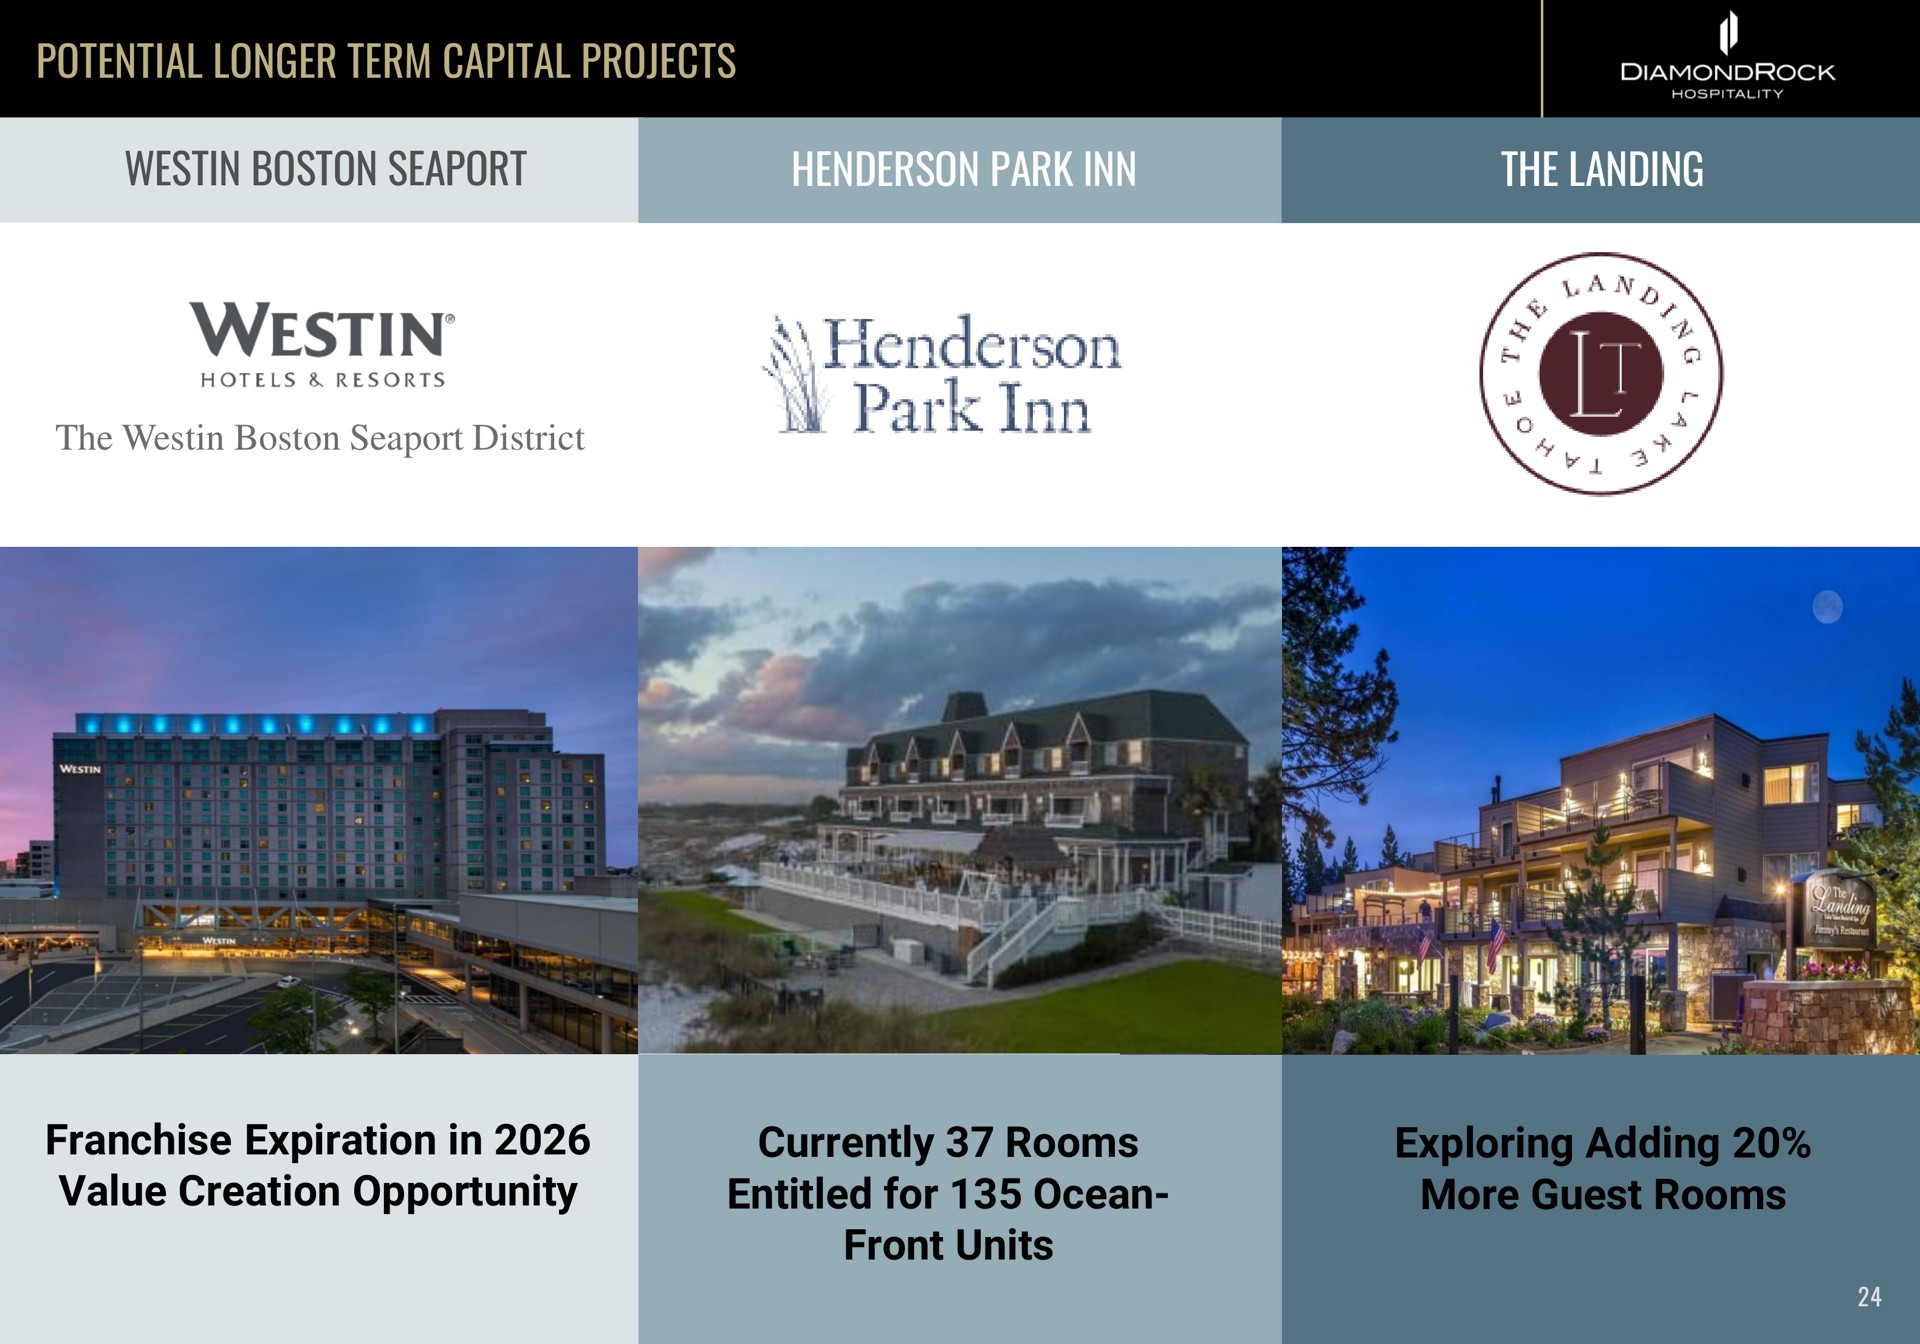 potential longer term capital projects boston seaport park inn the landing the boston seaport district franchise expiration in value creation opportunity currently rooms entitled for ocean front units exploring adding more guest rooms cee i an tan a a i tee ice rhe | DiamondRock Hospitality